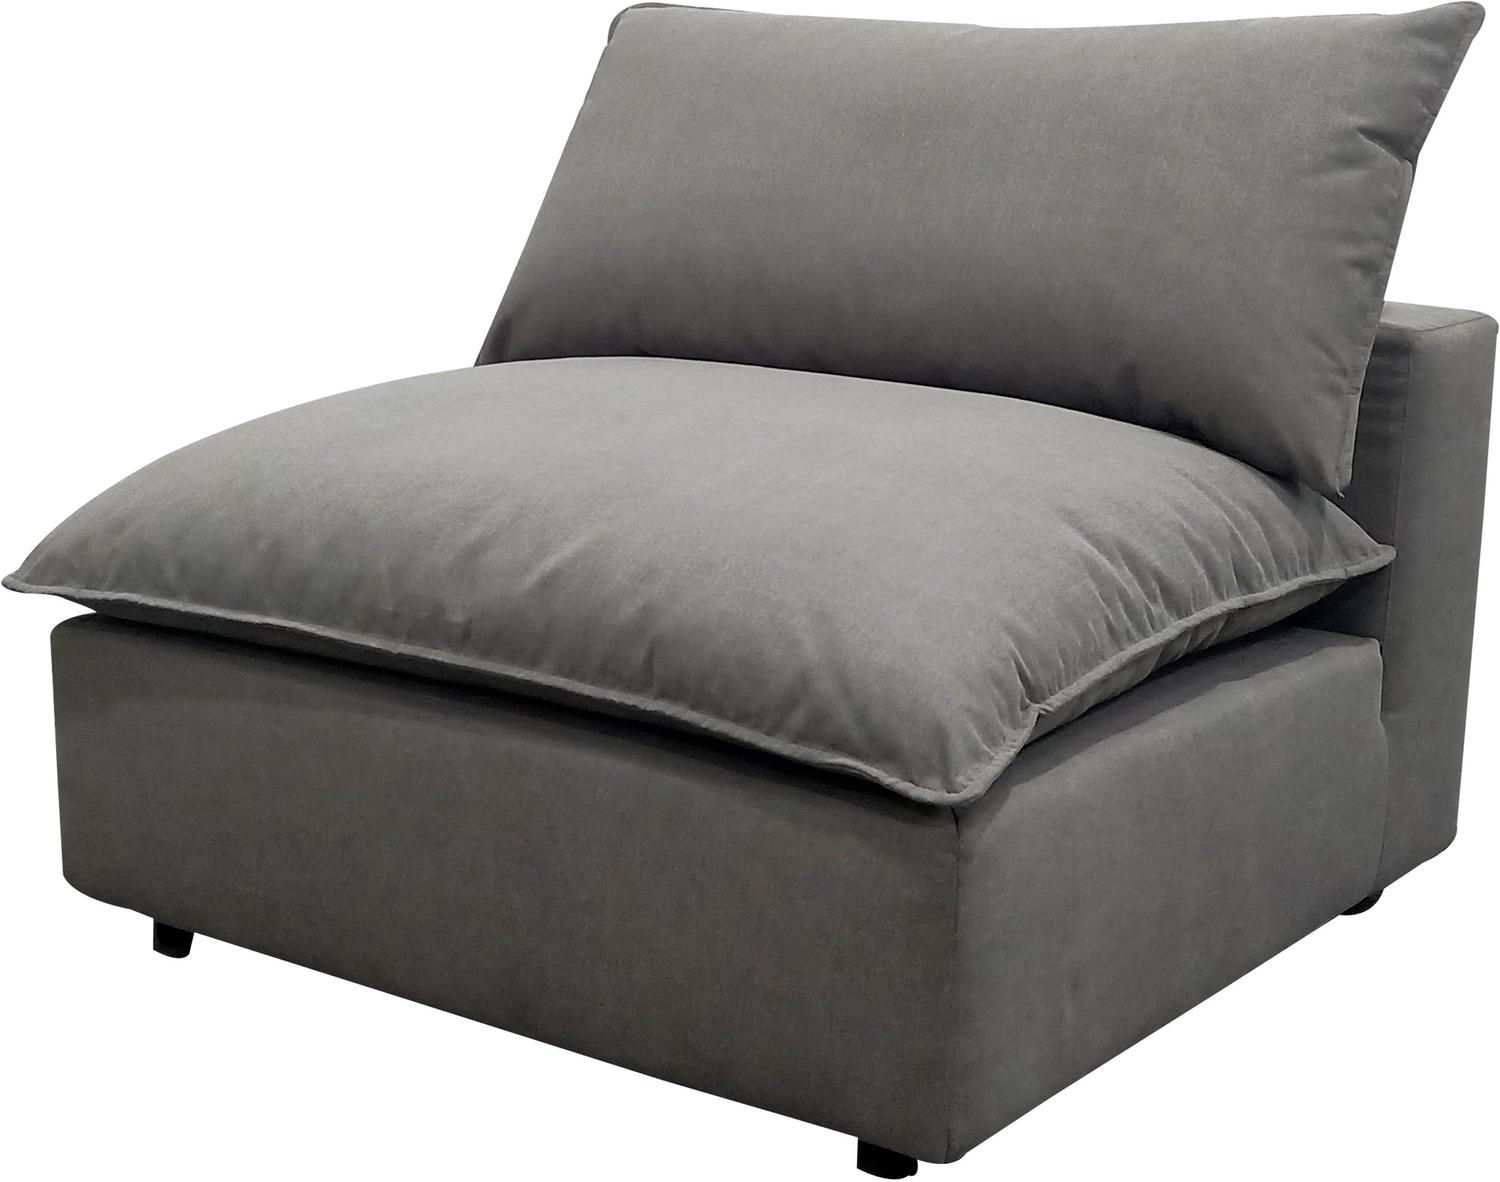 leather chaise chair Tov Furniture Sofas Slate